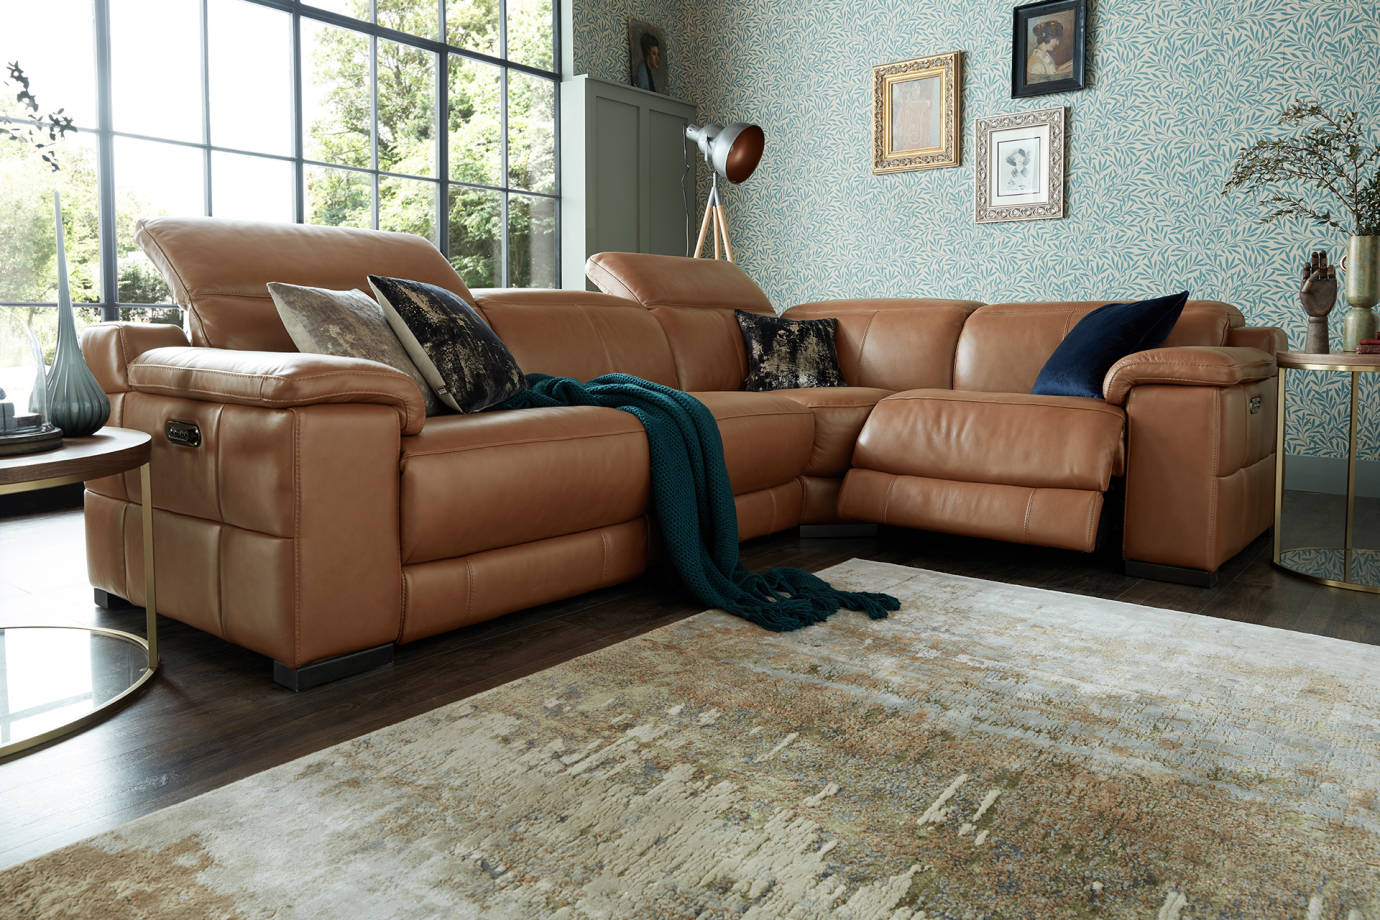 Corner Sofas Leather And Fabric, Small Corner Leather Couches